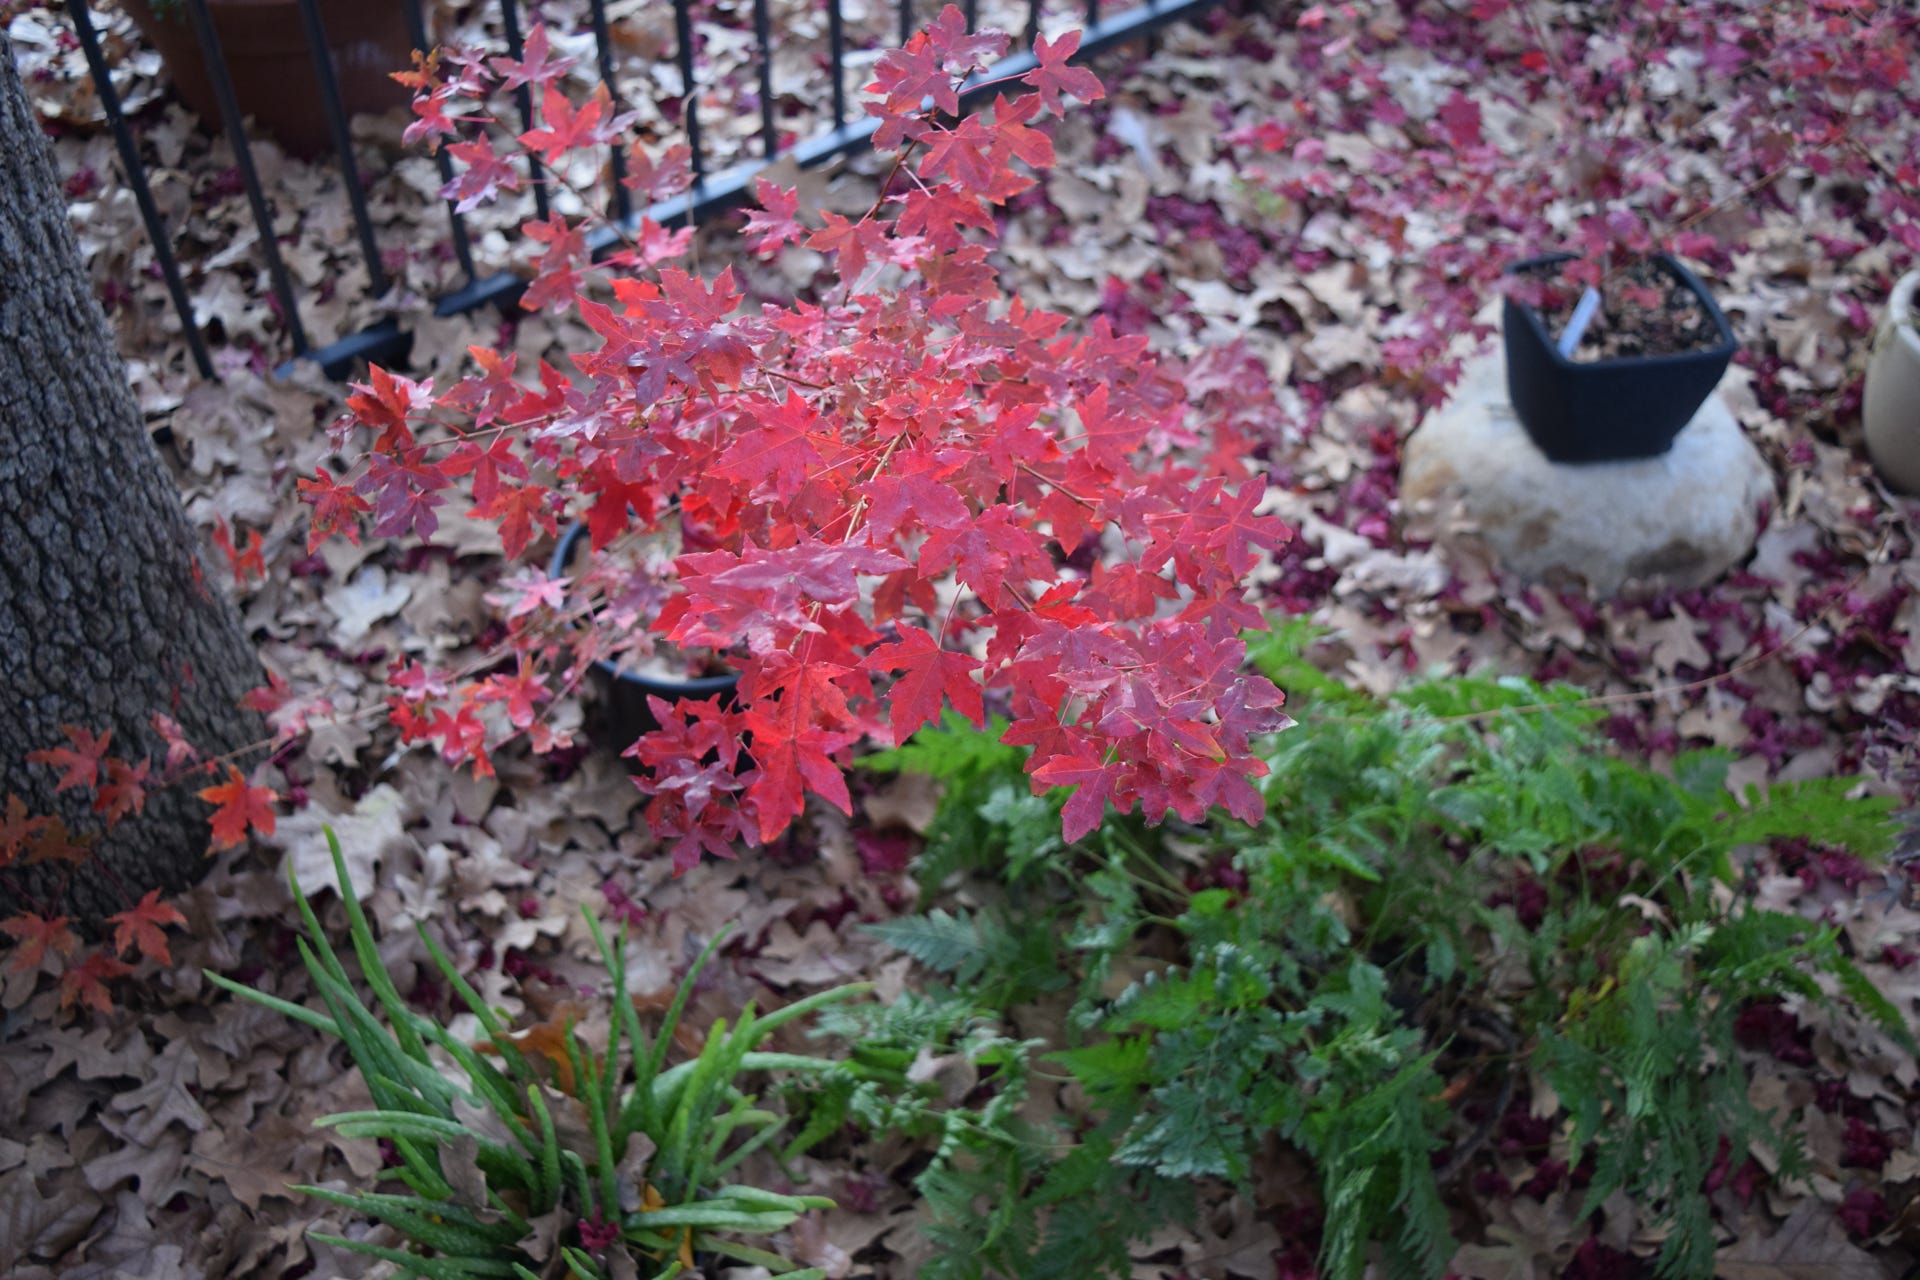 Acer truncatum White Dragon, Shantung maple dwarf with exceptional fall colors discovered at Metro Maples.